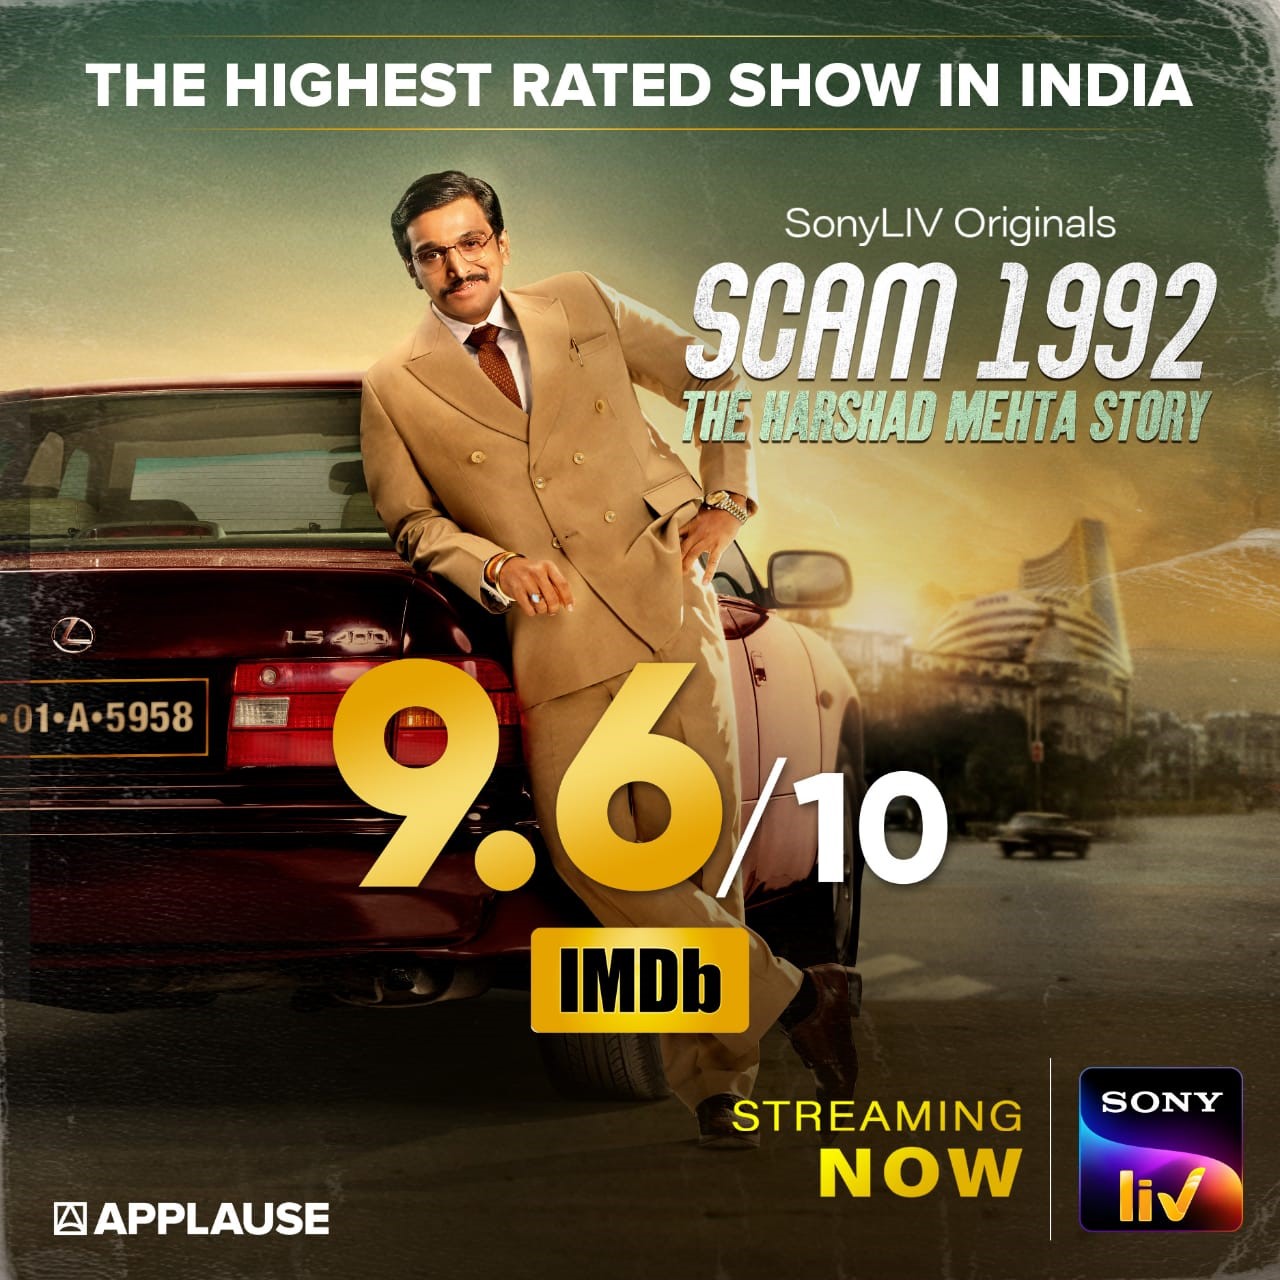 Applause Entertainment’ Scam 1992: The Harshad Mehta Story becomes the second name in the top 5 OTT shows with 6.6 million hits 1